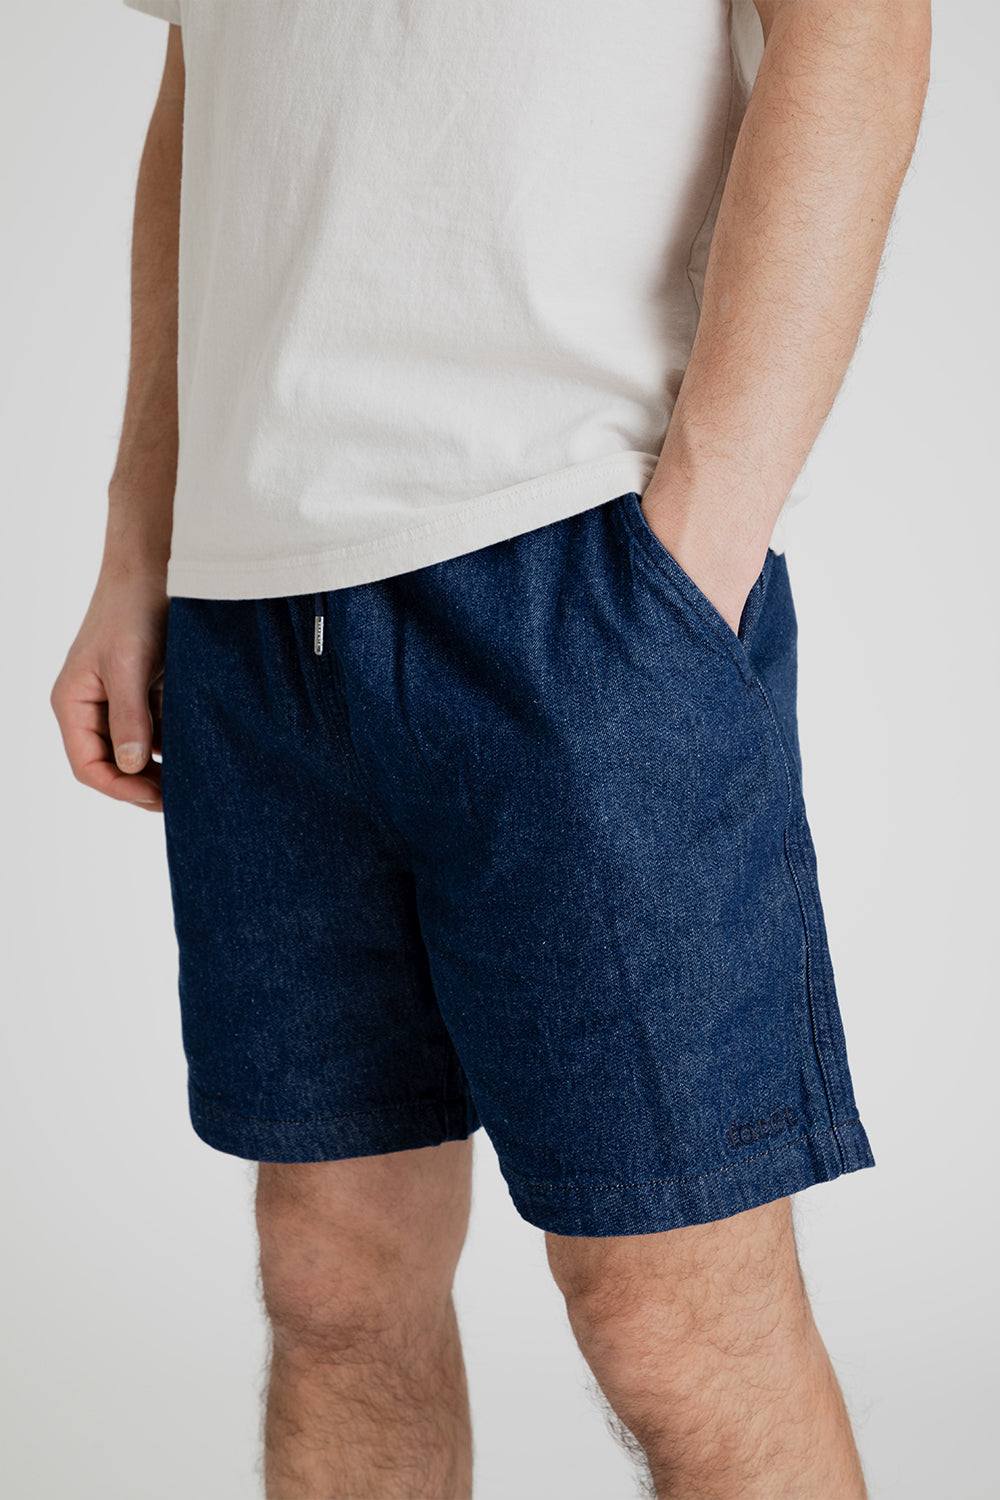 Foret Home Shorts in Denim